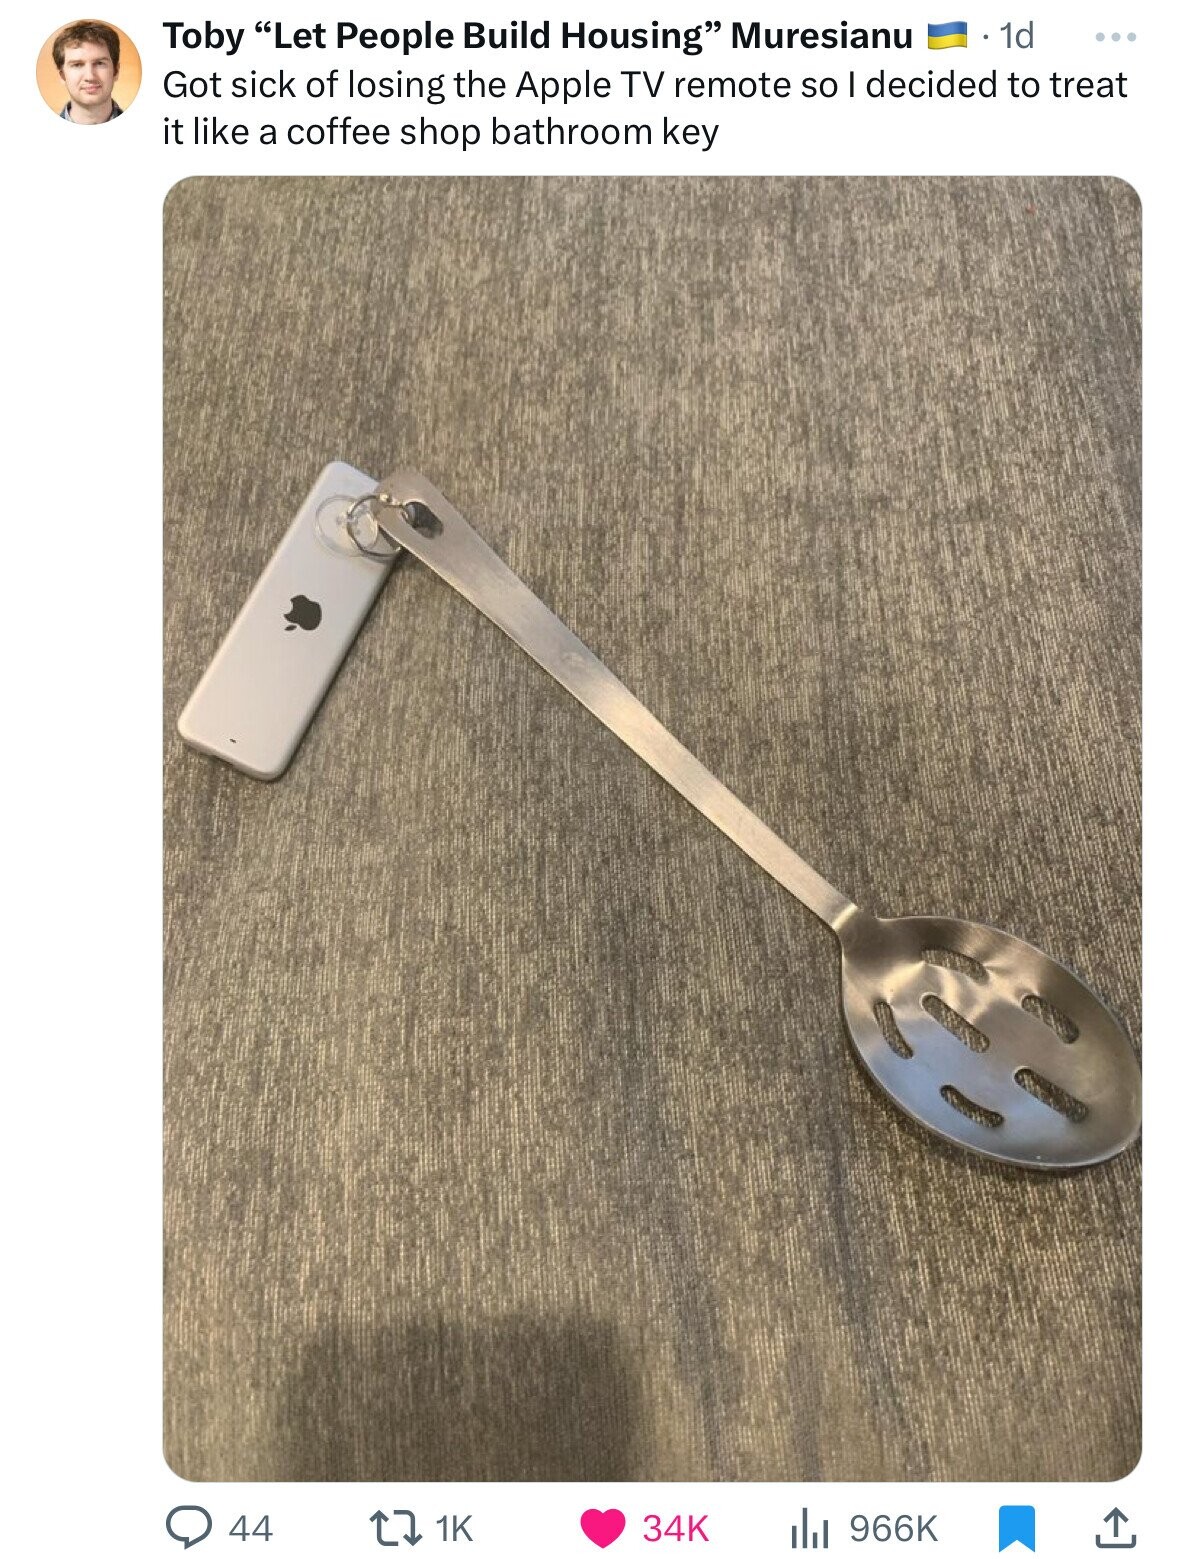 spoon - Toby "Let People Build Housing" Muresianu 1.1d Got sick of losing the Apple Tv remote so I decided to treat it a coffee shop bathroom key O 34K 1